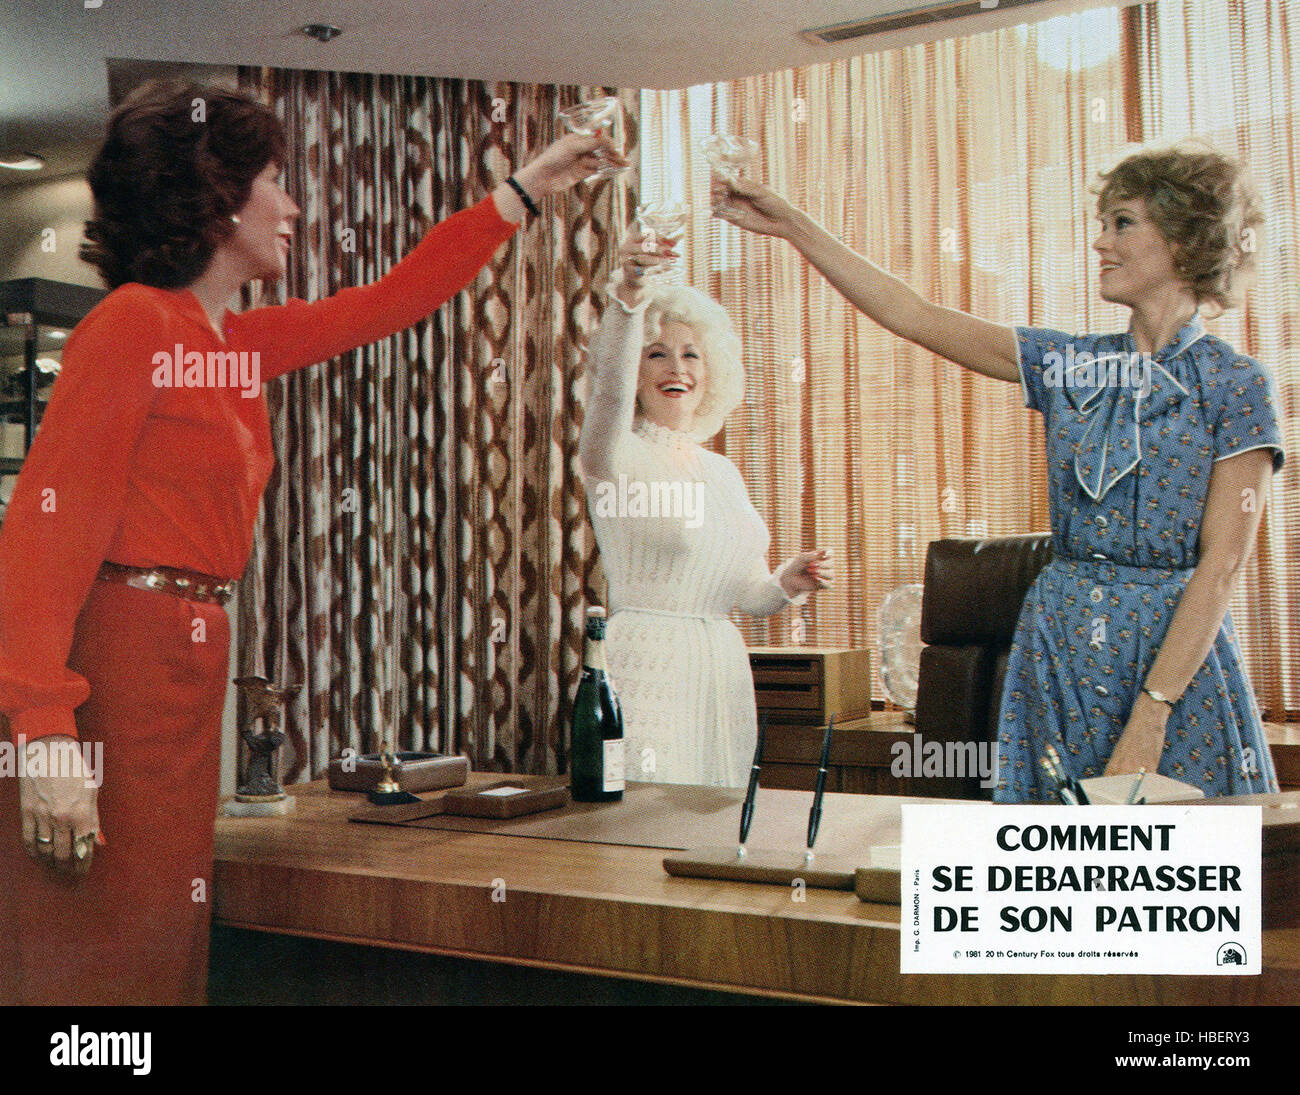 Nine To Five Aka 9 To 5 Aka Comment Se Debarrasser De Son Patron From Left Lily Tomlin